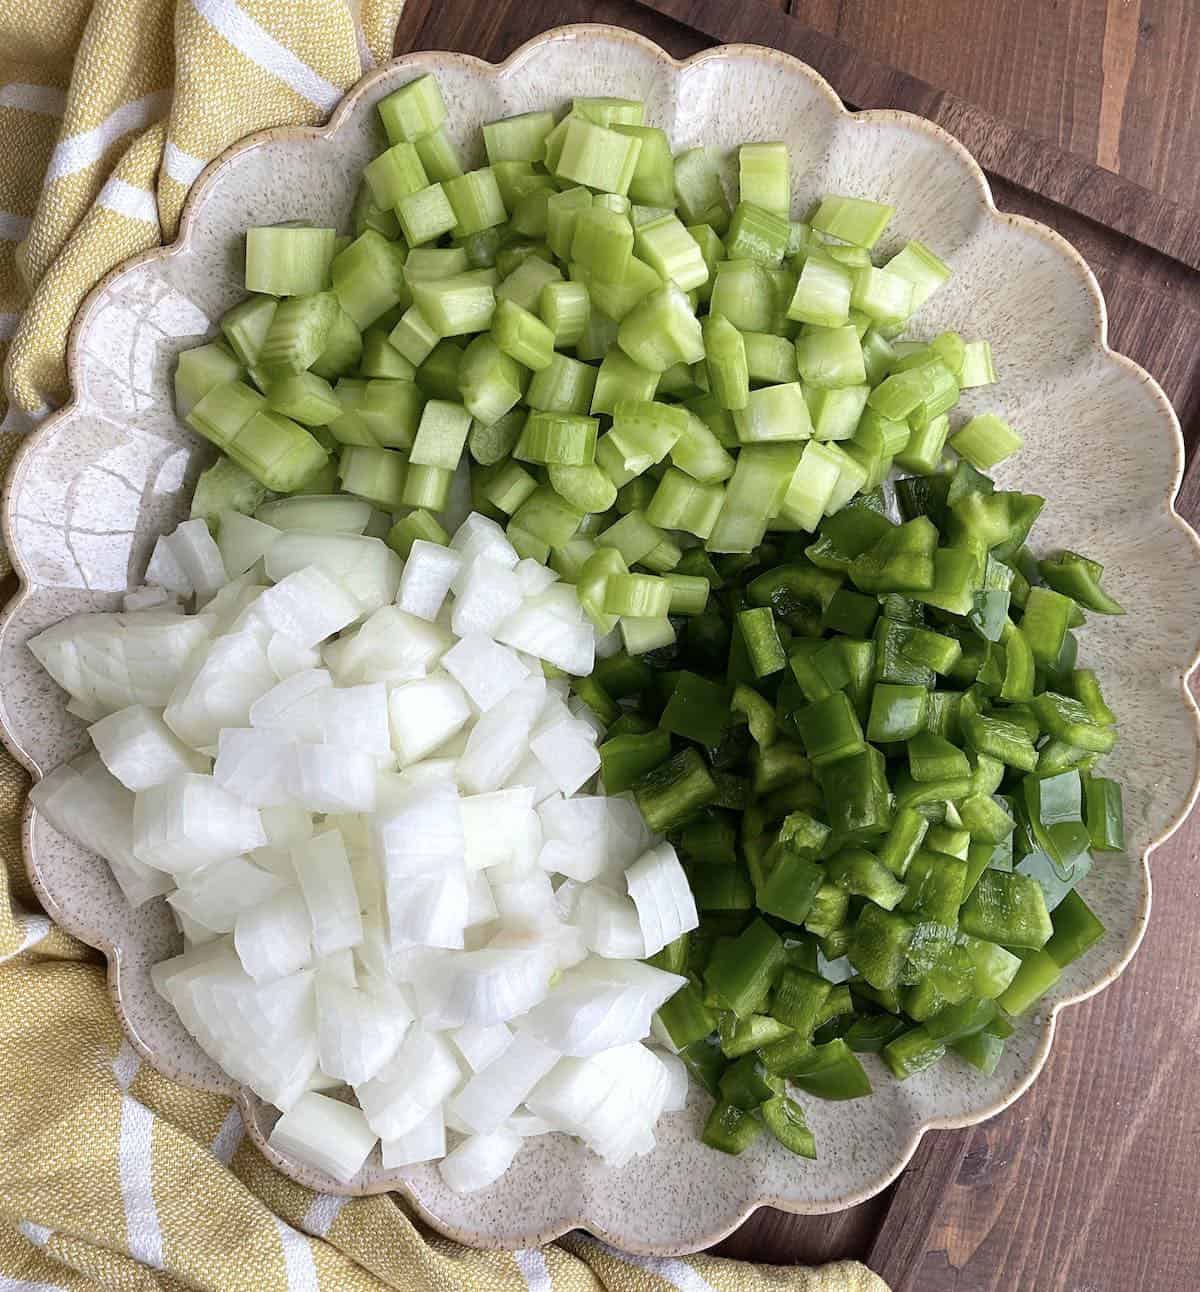 A plate with diced onions, green bell peppers, and celery to make a Cajun Holy Trinity.